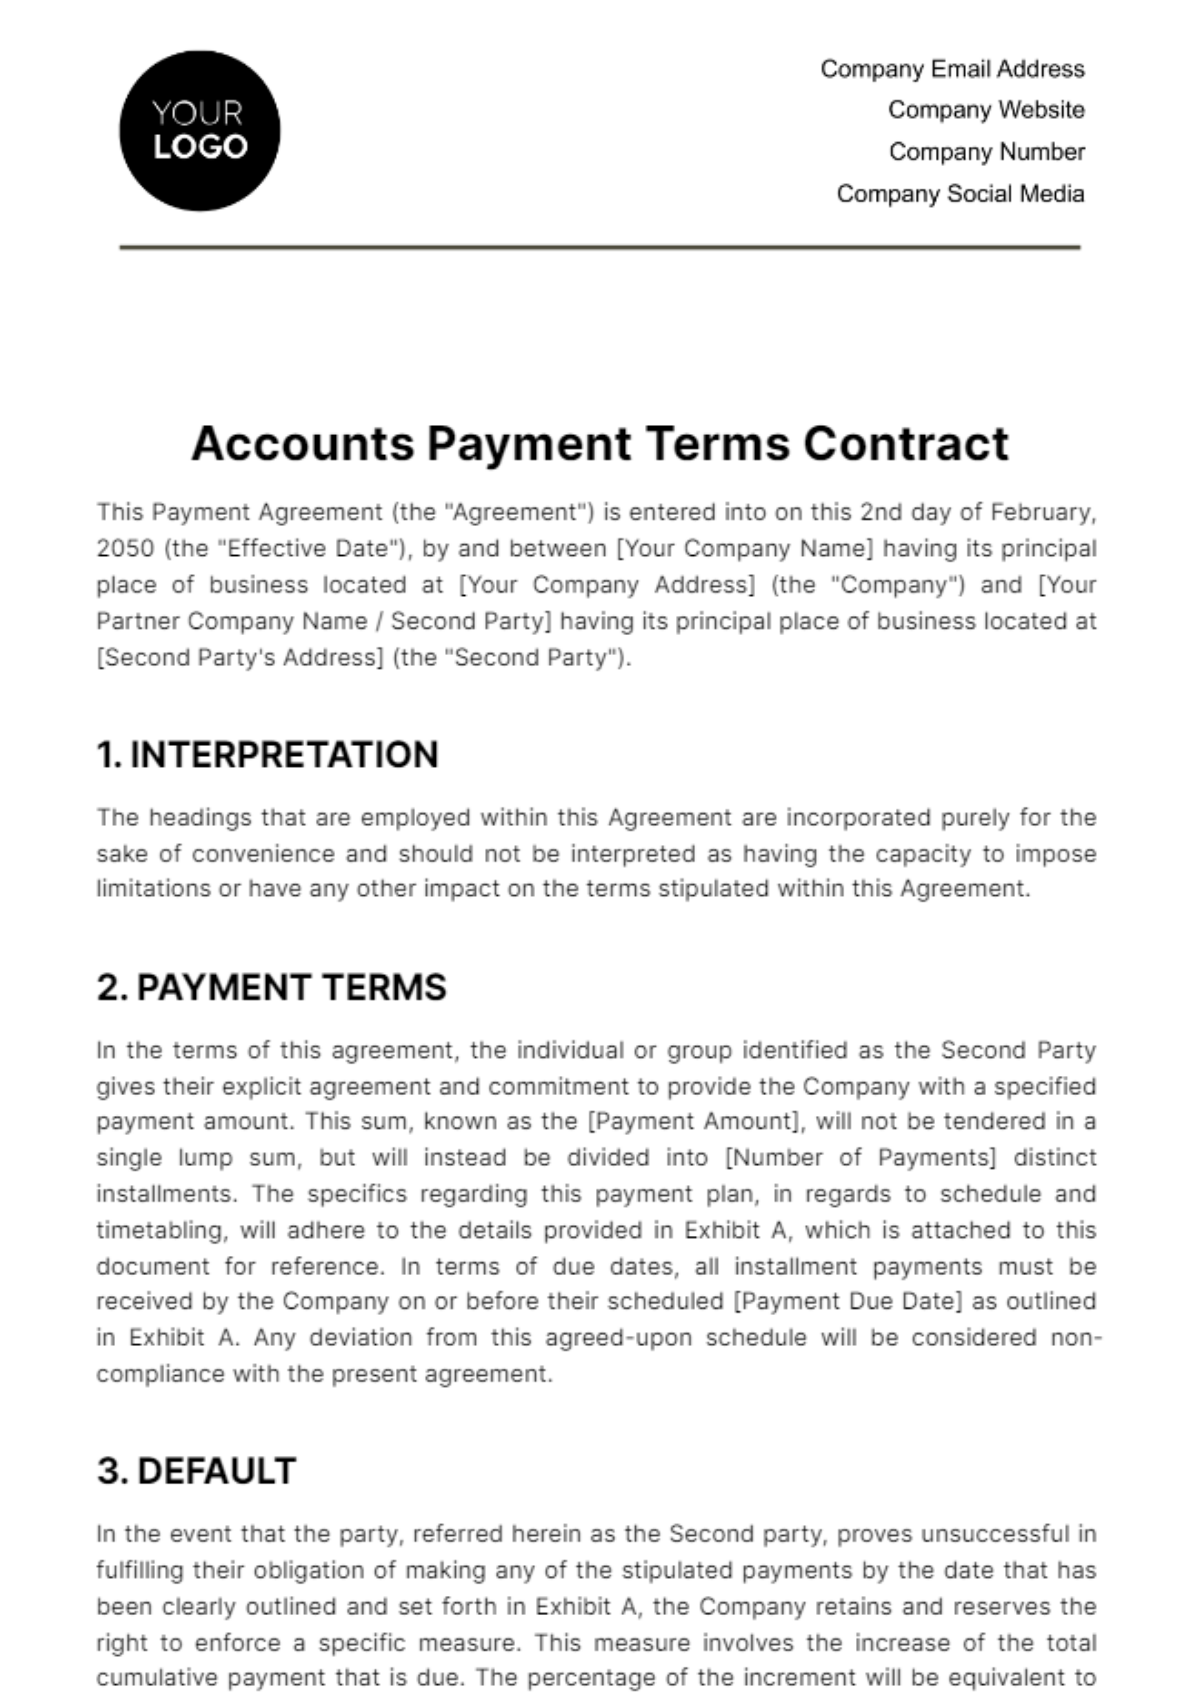 Free Accounts Payment Terms Contract Template